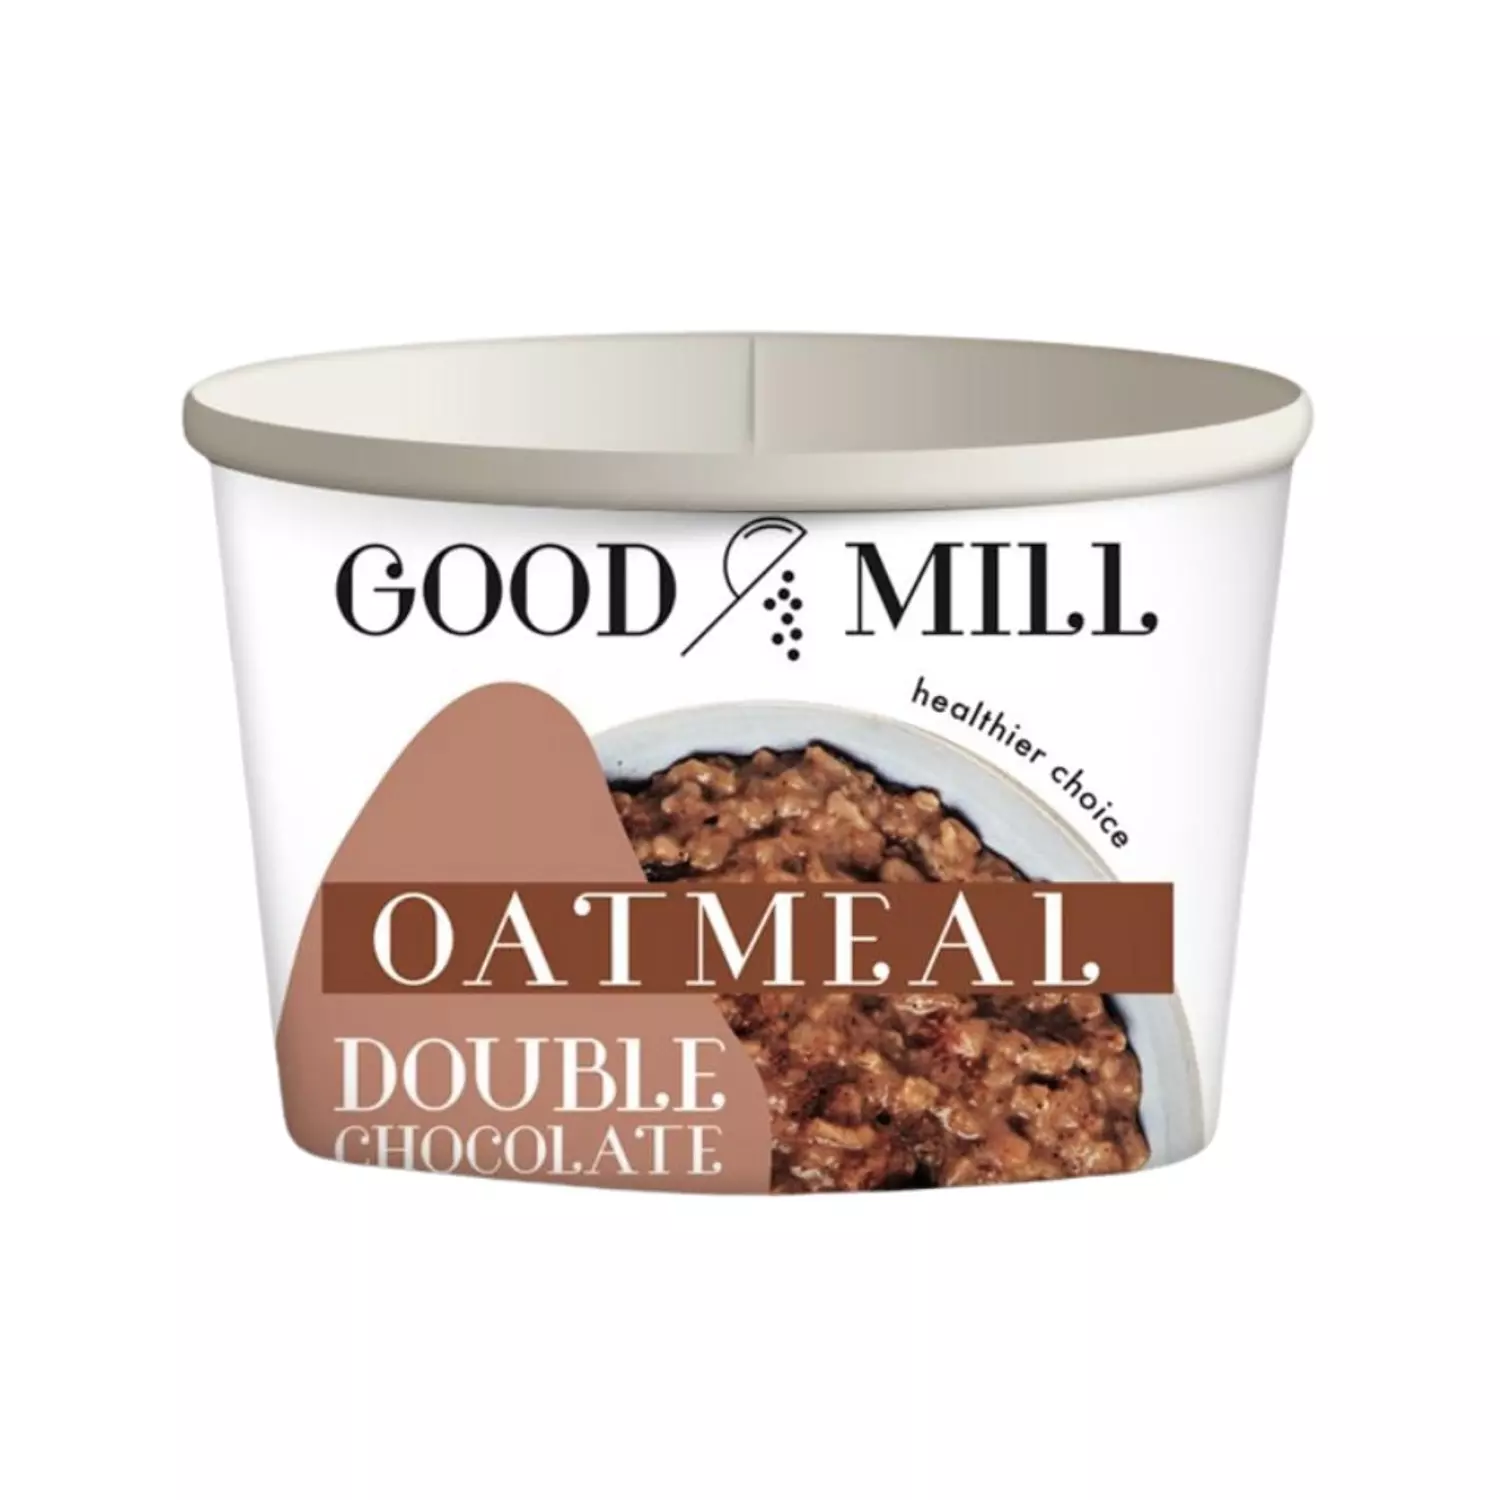 Oatmeal double chocolate  hover image